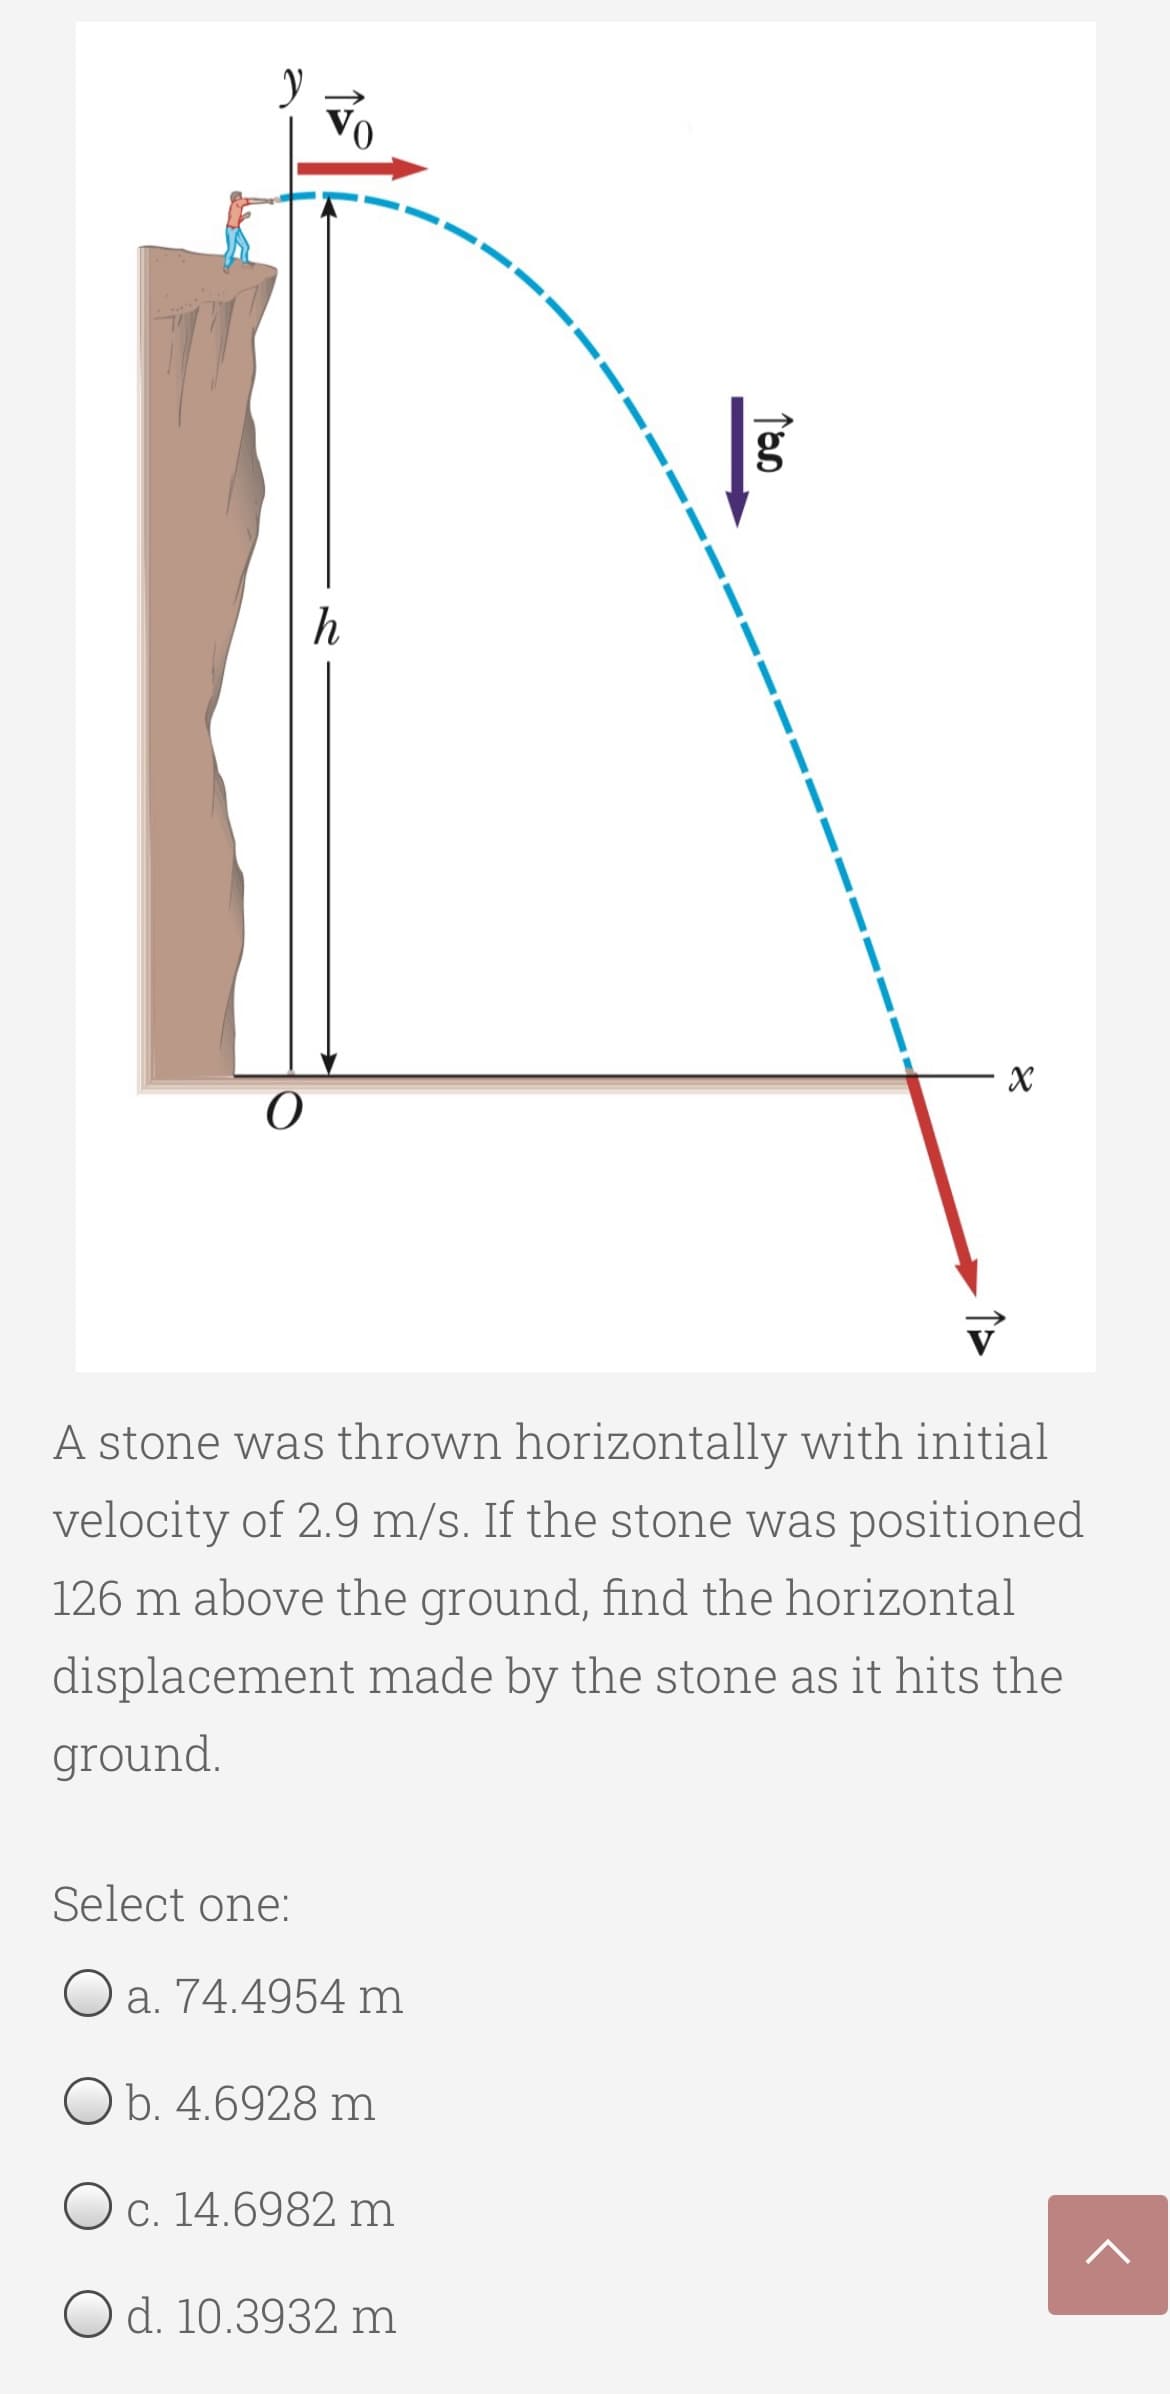 h
A stone was thrown horizontally with initial
velocity of 2.9 m/s. If the stone was positioned
126 m above the ground, find the horizontal
displacement made by the stone as it hits the
ground.
Select one:
O a. 74.4954 m
O b. 4.6928 m
O c. 14.6982 m
O d. 10.3932 m
